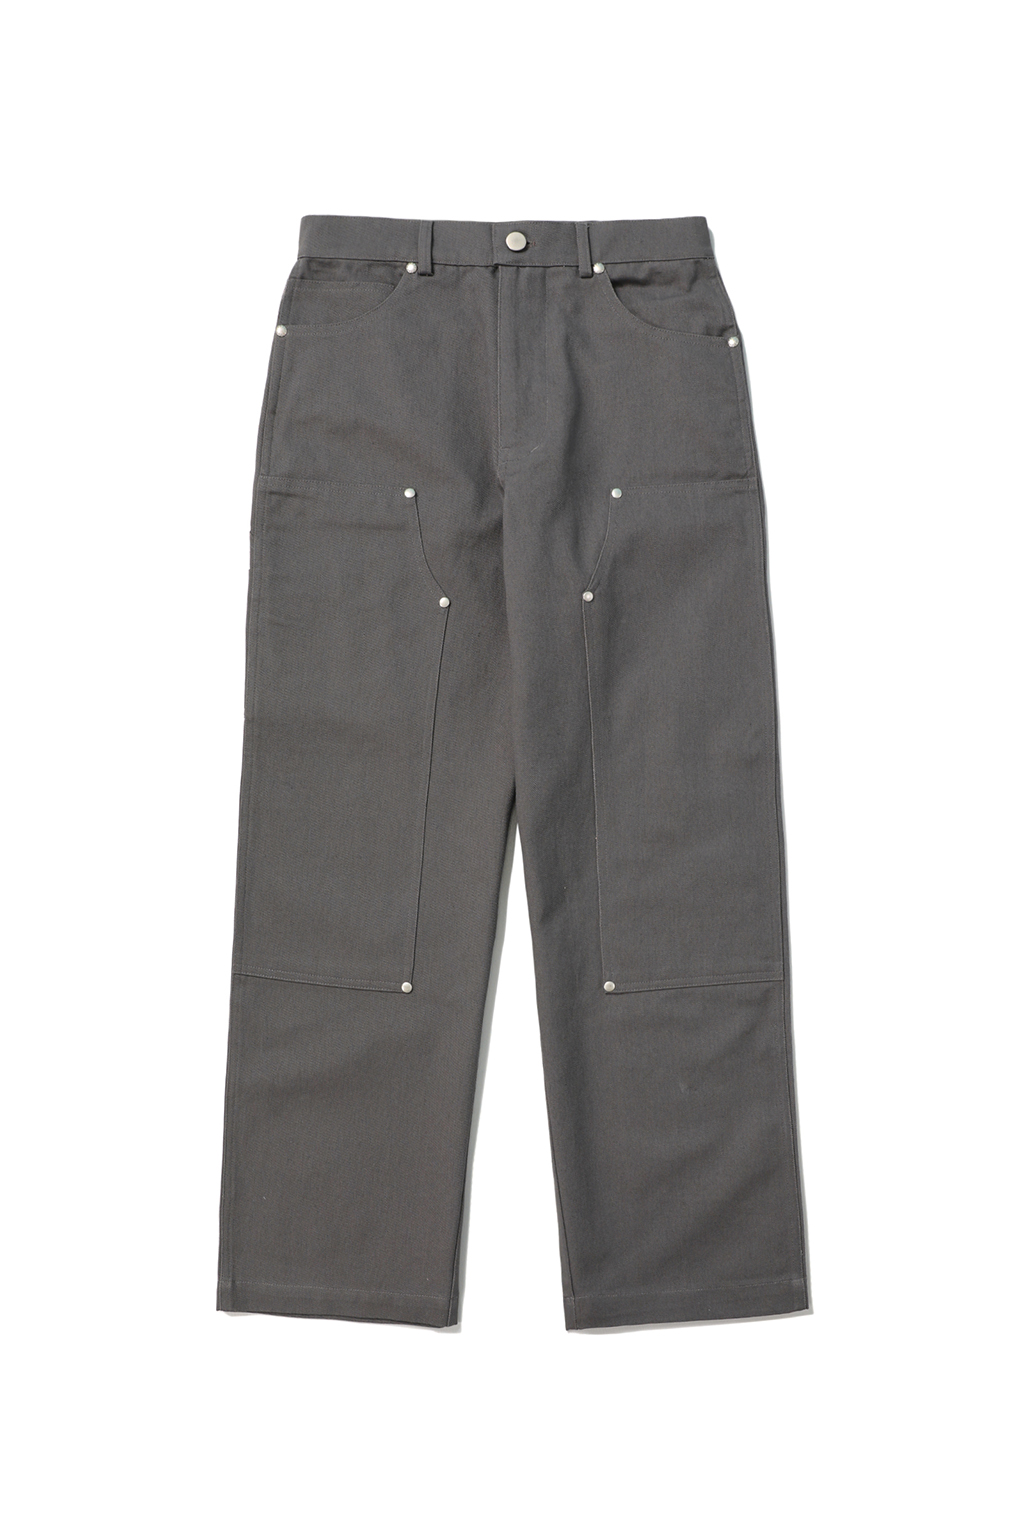 DOUBLE KNEE CARPENTER PANTS [CHARCOAL BROWN]